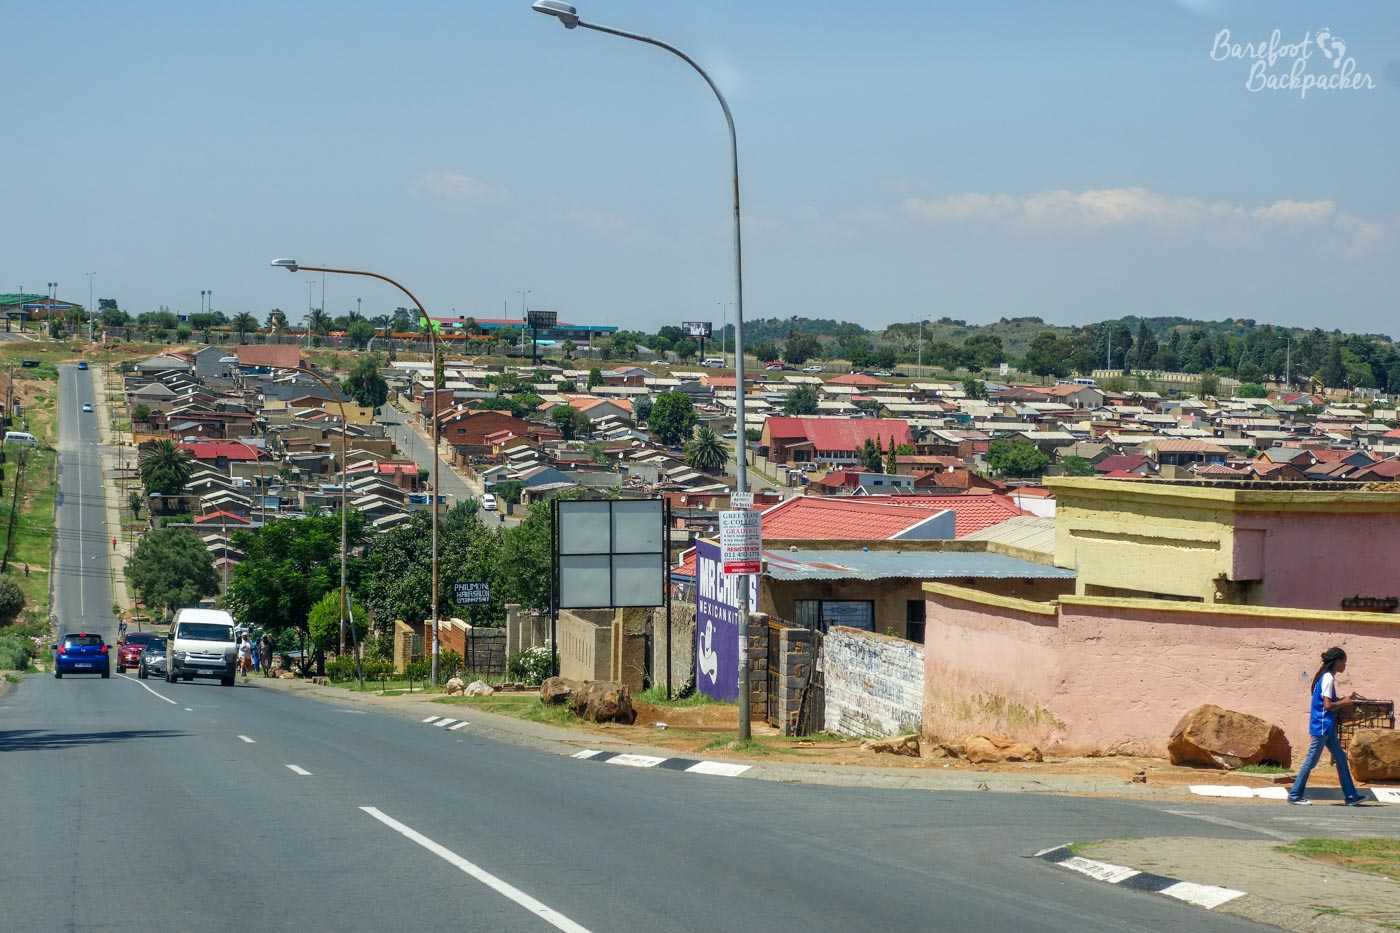 Overview of part of Soweto, looking out over some of the houses from a street in the outskirts